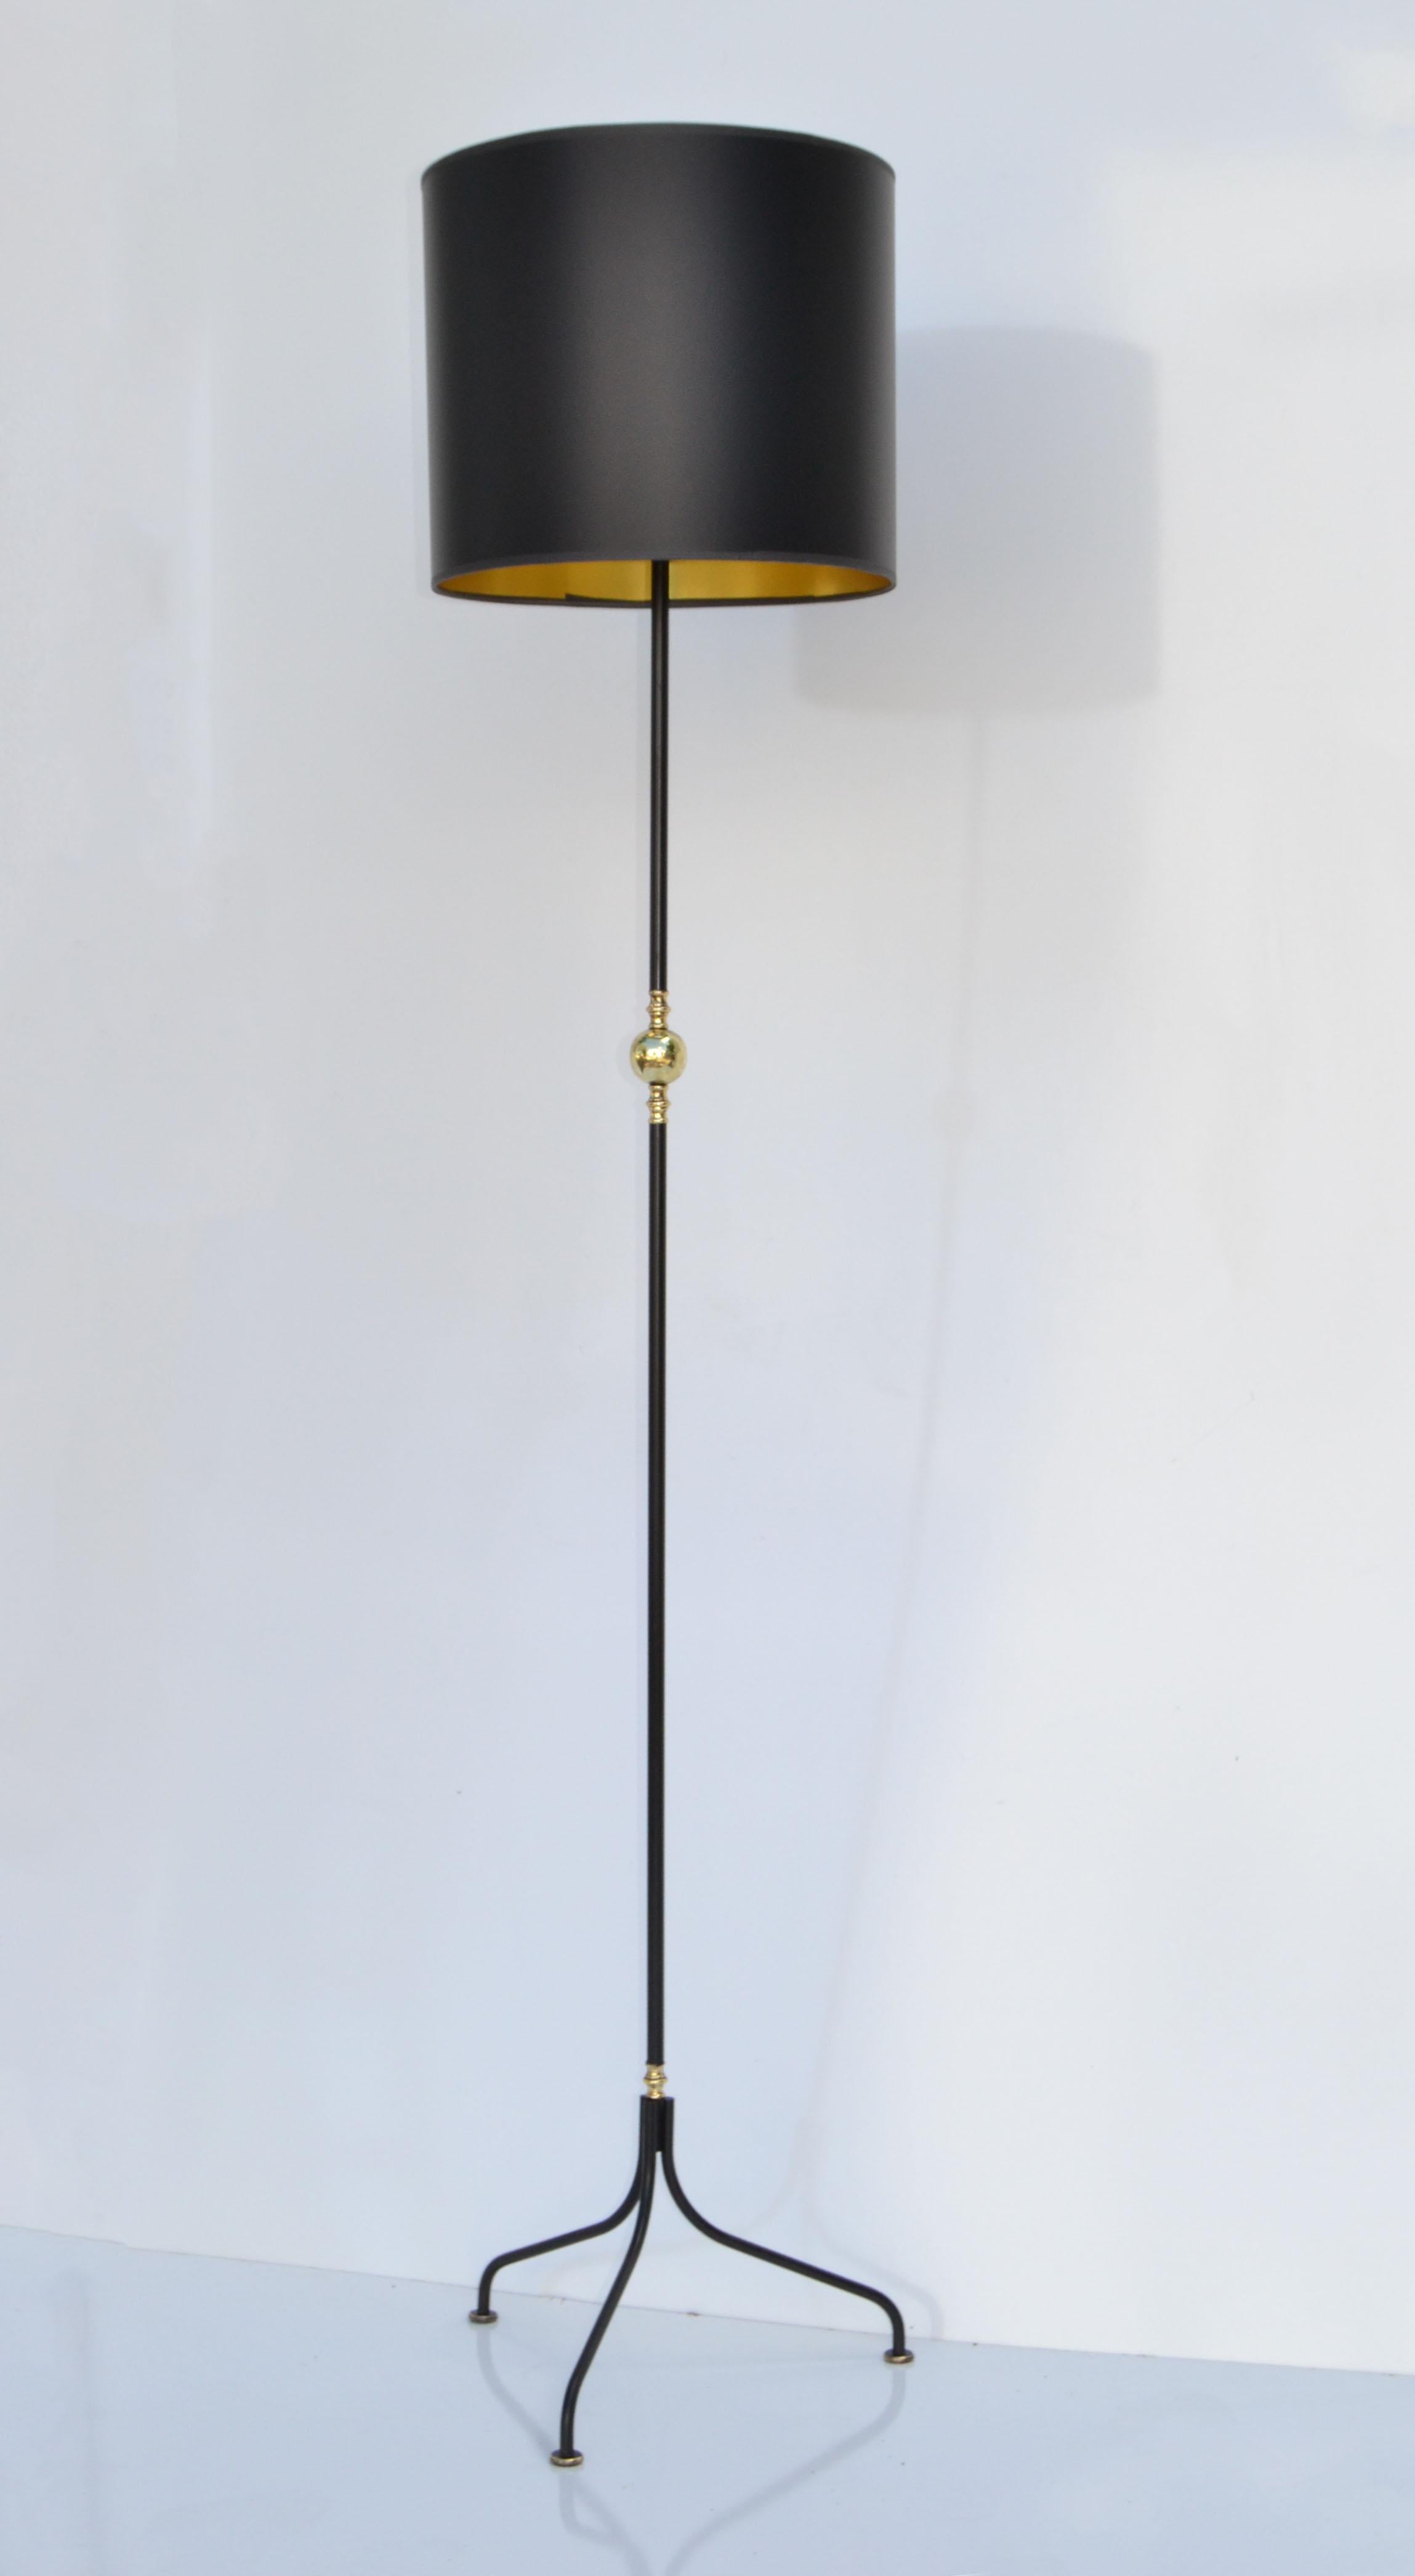 Superb Jacques Adnet Style Floor Lamp in Brass and black finished Iron on a decorative Tripod Base with Brass Glides. 
Comes with custom made Black & Gold Paper Drum Shade.
Mid-Century Modern Design from France and made 1950.
US rewired and in